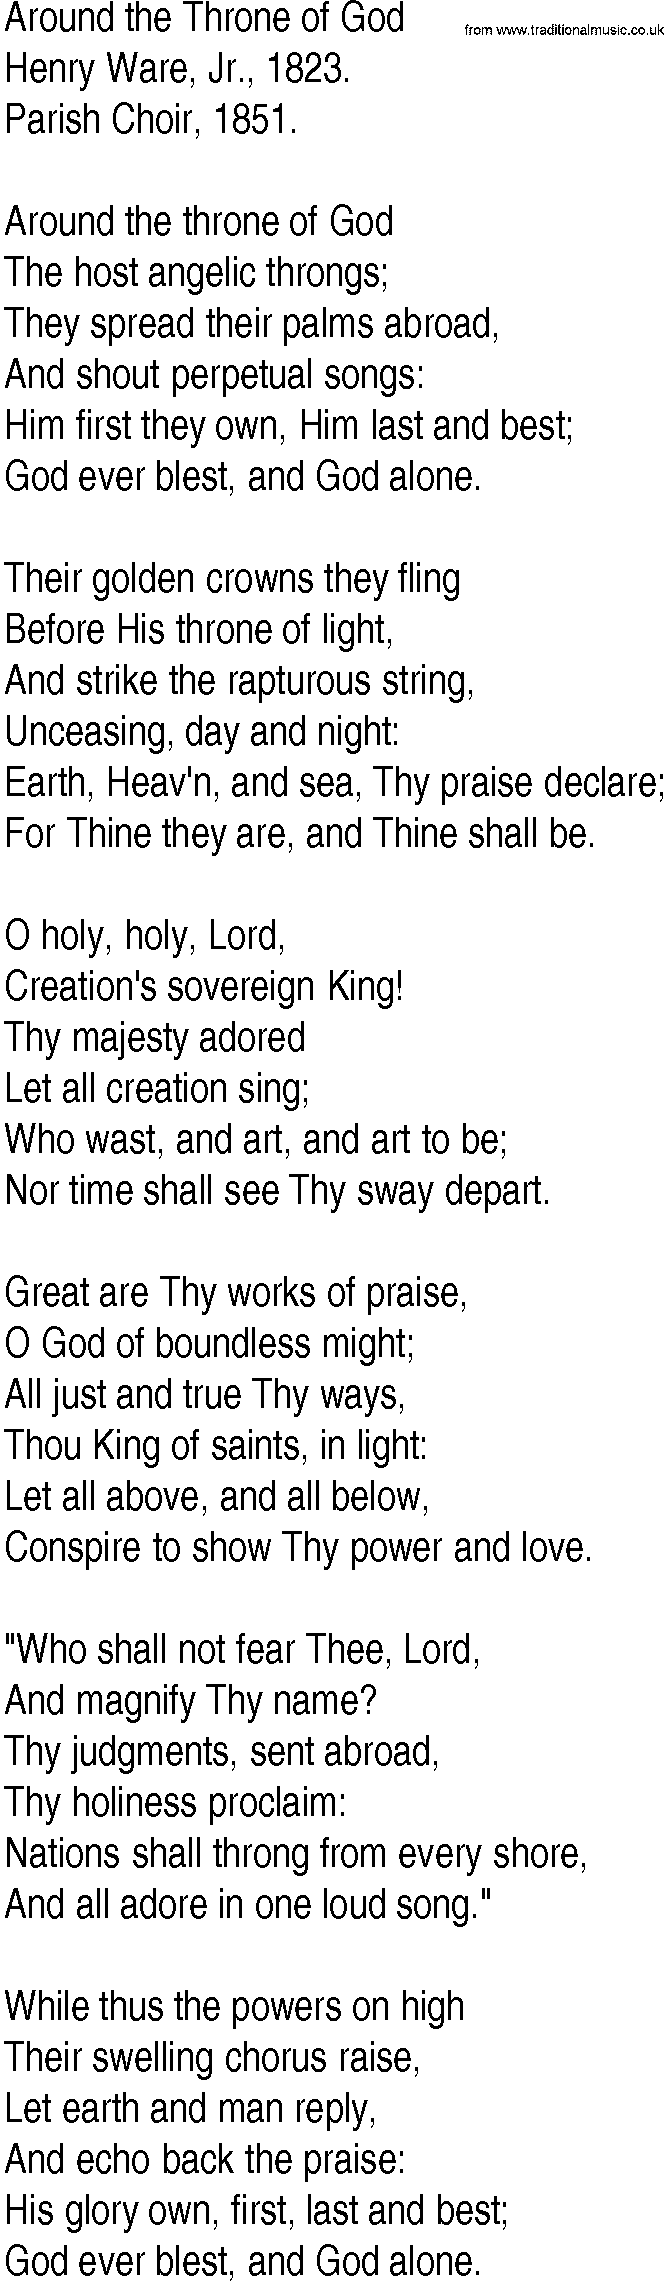 Hymn and Gospel Song: Around the Throne of God by Henry Ware Jr lyrics